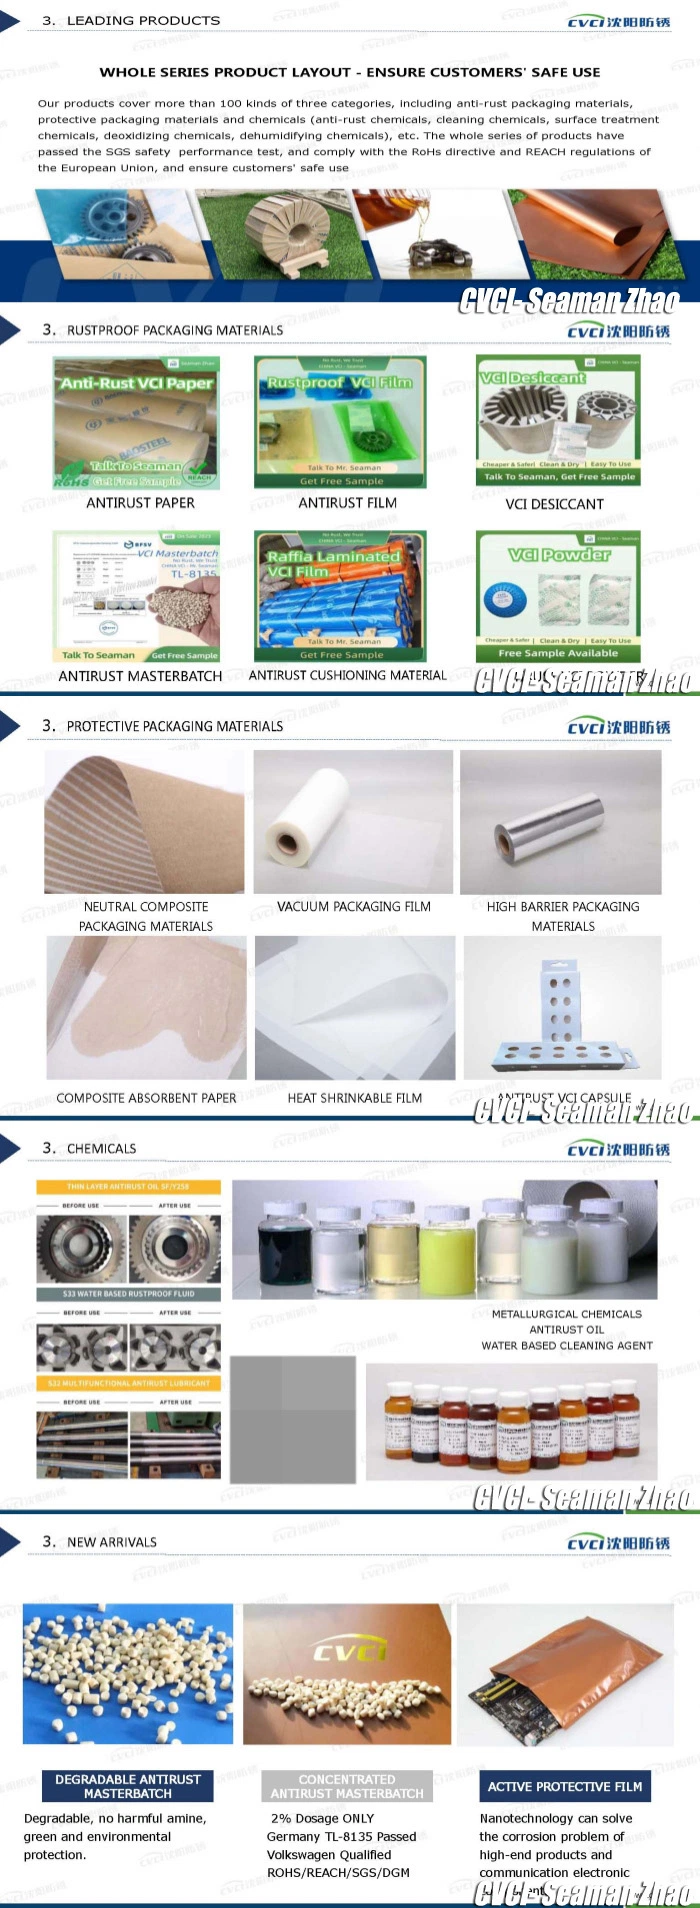 35 Years Factory Corrosion Protection Films Casting/Extrusion 2% Dosage Only Vci Master Batch